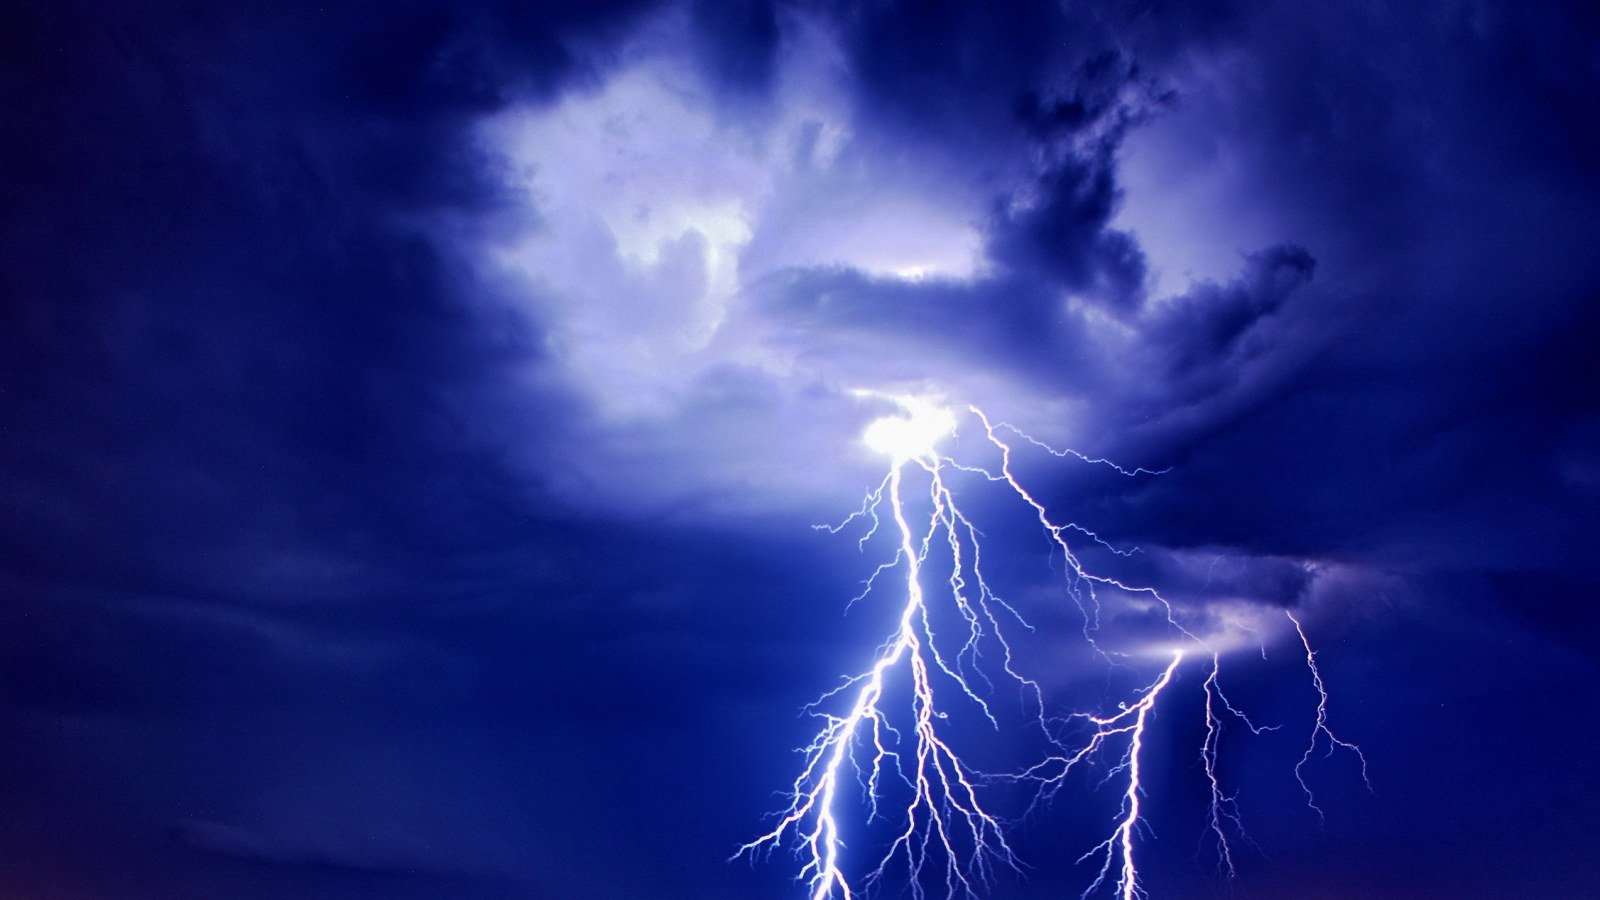 Florida Man Remains Unconscious Days After Being Struck by Lightning While  He Was Sitting in Wheelchair Under a Tree